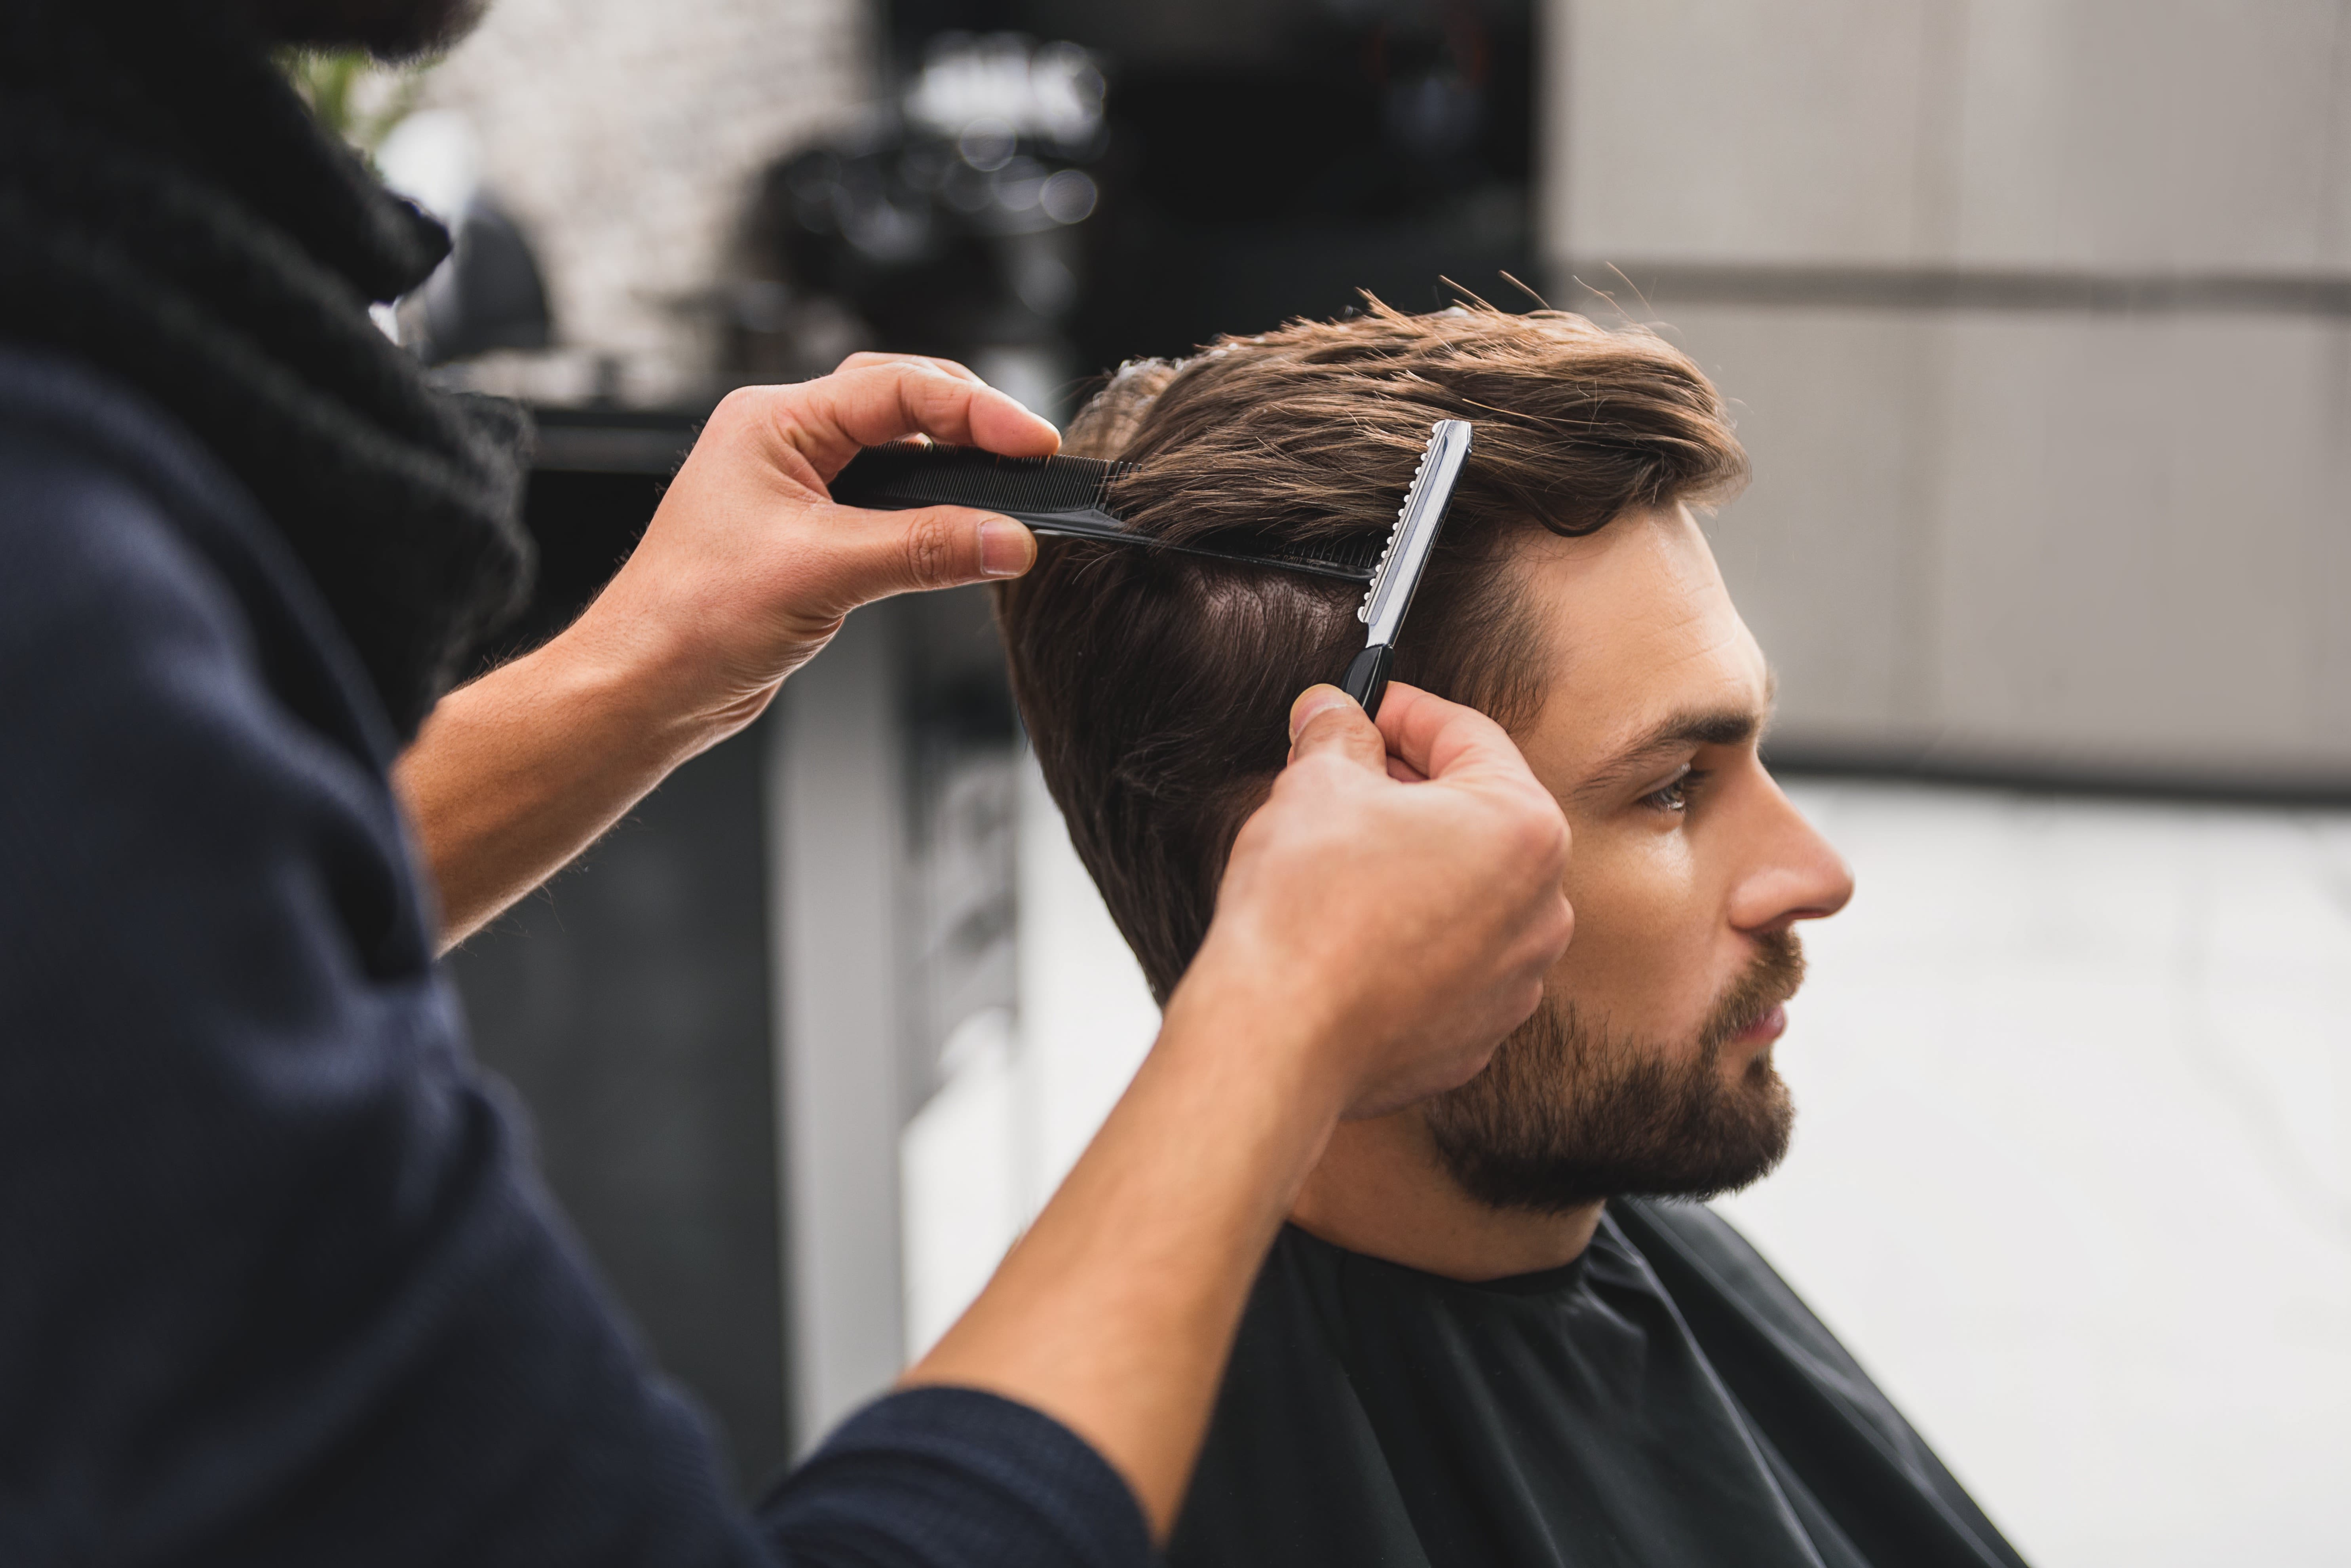 The Brooklyn Barber Academy: Read Reviews and Book Classes on ClassPass